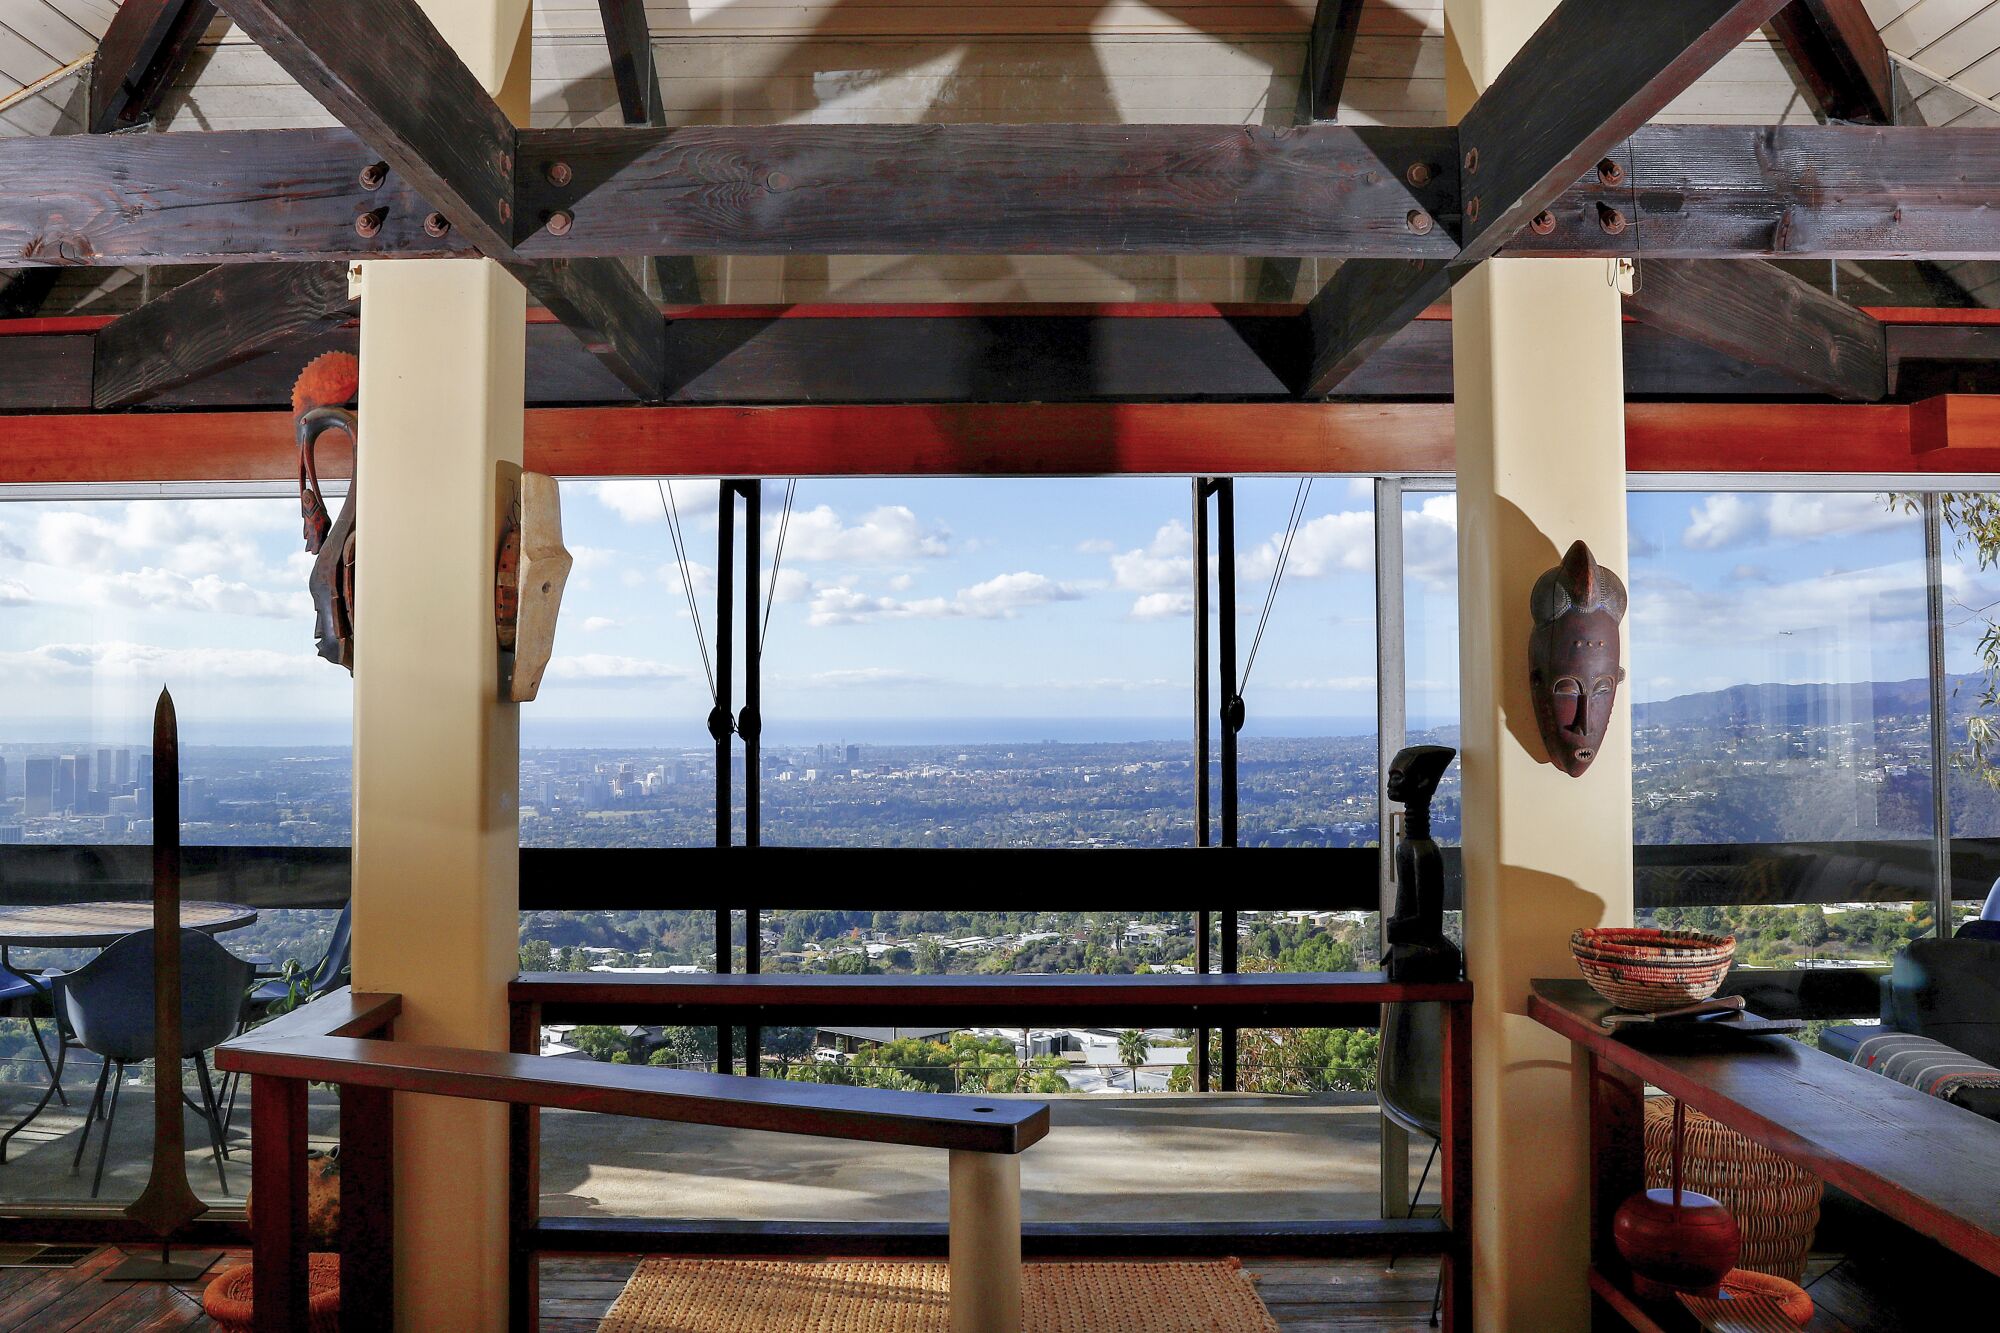 A view of Bernard Judge's Tree House shows a woody living room area with views of the Los Angeles Basin